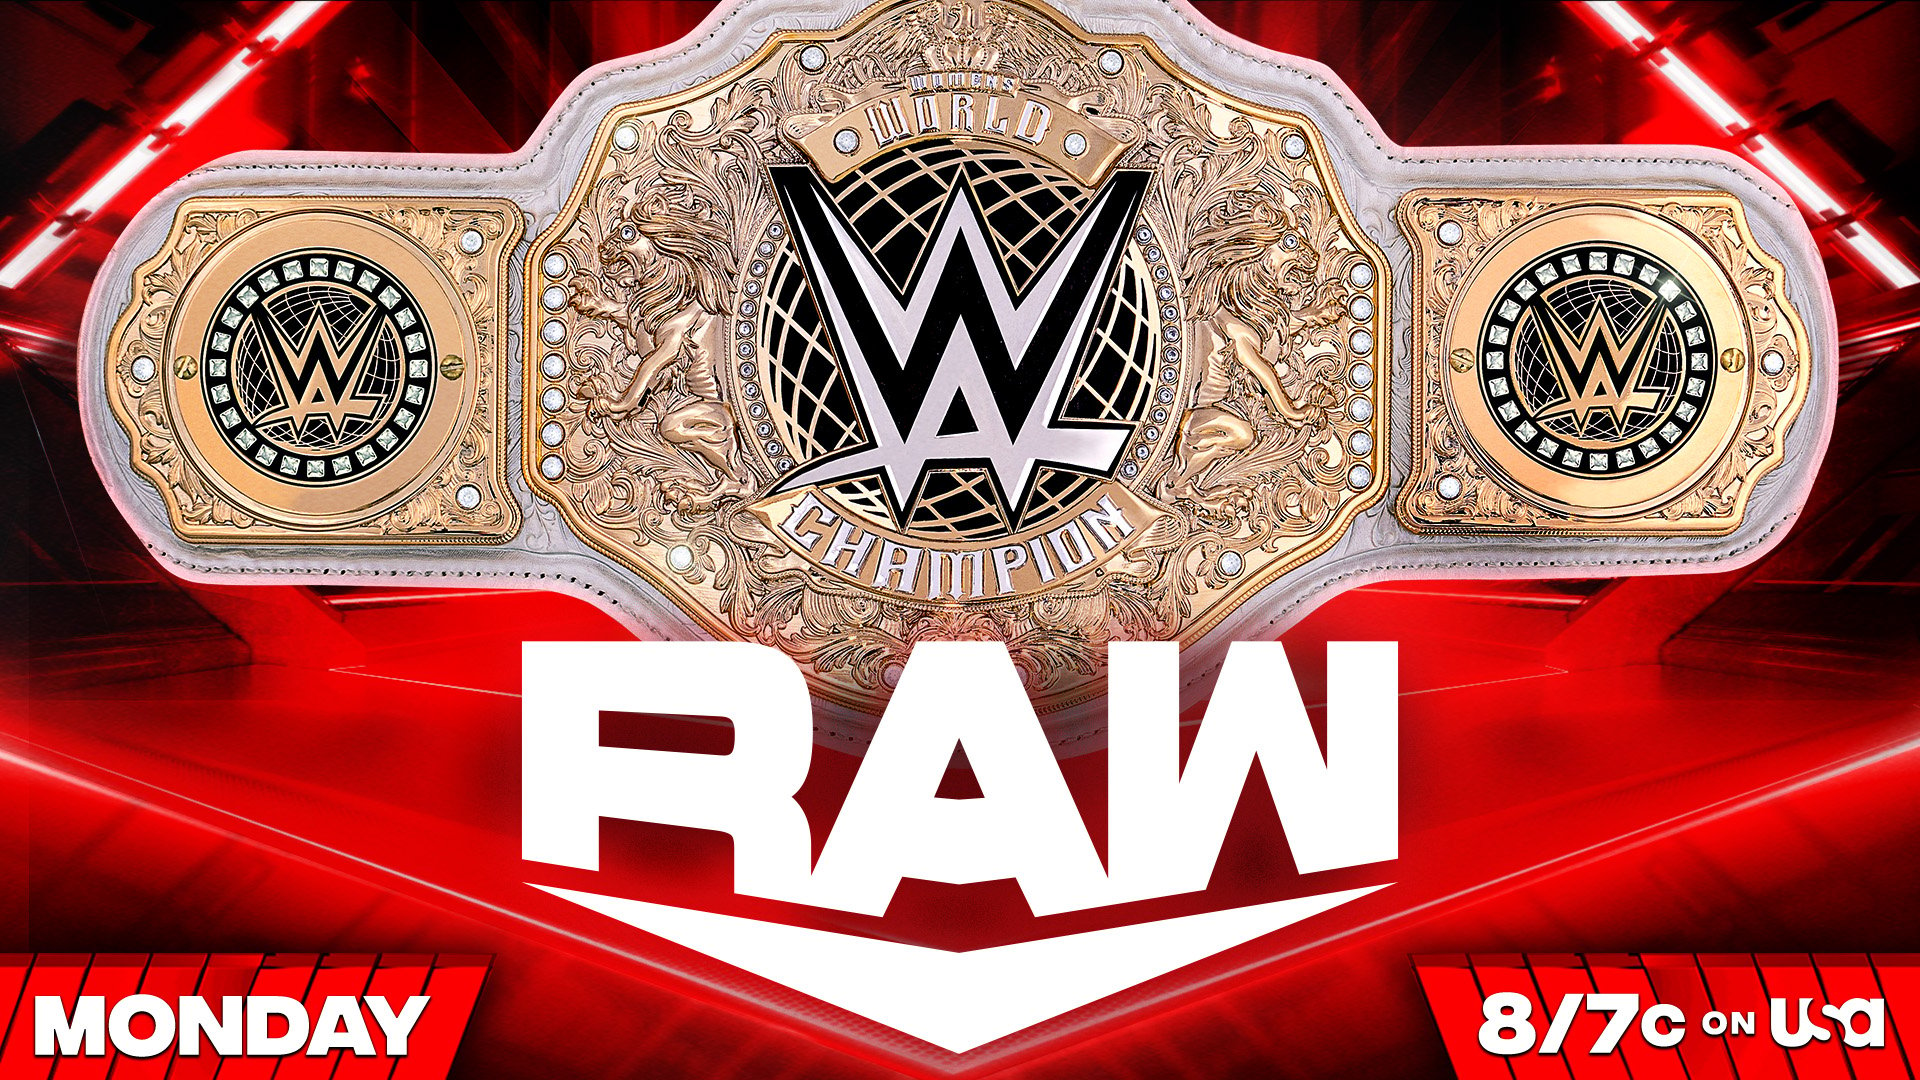 The Process of Crowning a New Women’s World Champion on Monday’s Episode of RAW in WWE